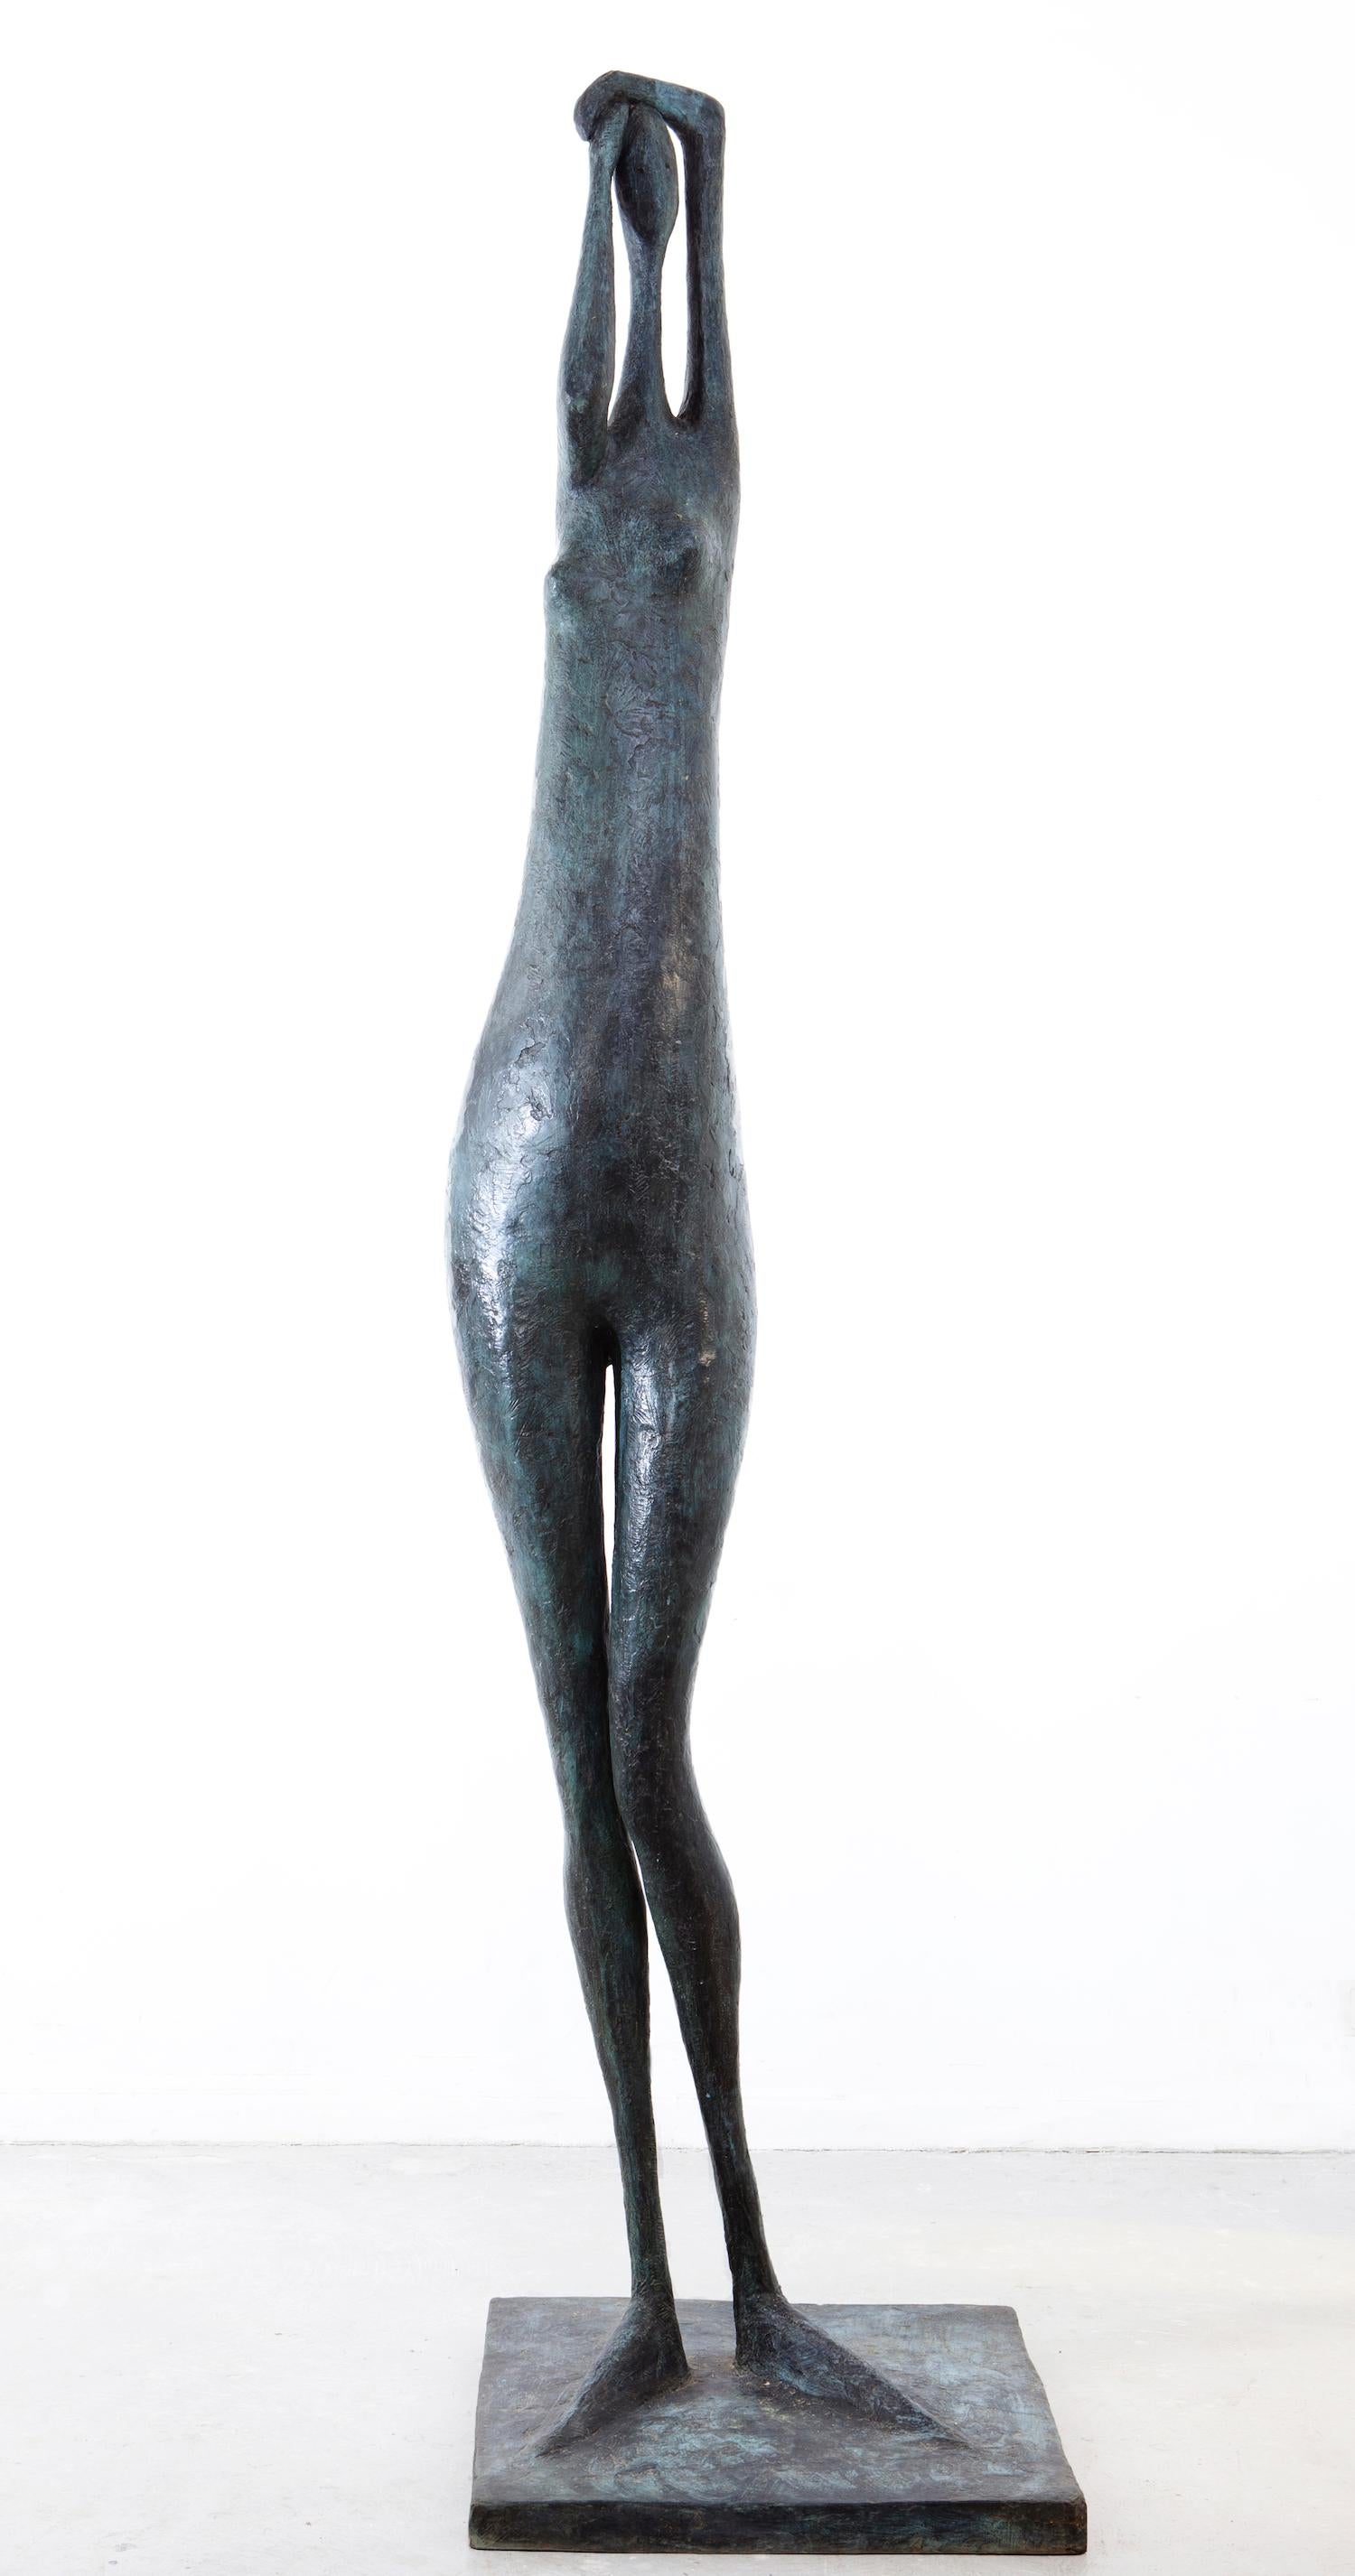 Arms Raised Monumental Standing Figure I is a bronze sculpture by French contemporary artist Pierre Yermia, dimensions are  250 × 60 × 60 cm (98.4 × 23.6 × 23.6 in). 
The sculpture is signed and numbered, it is part of a limited edition of 8